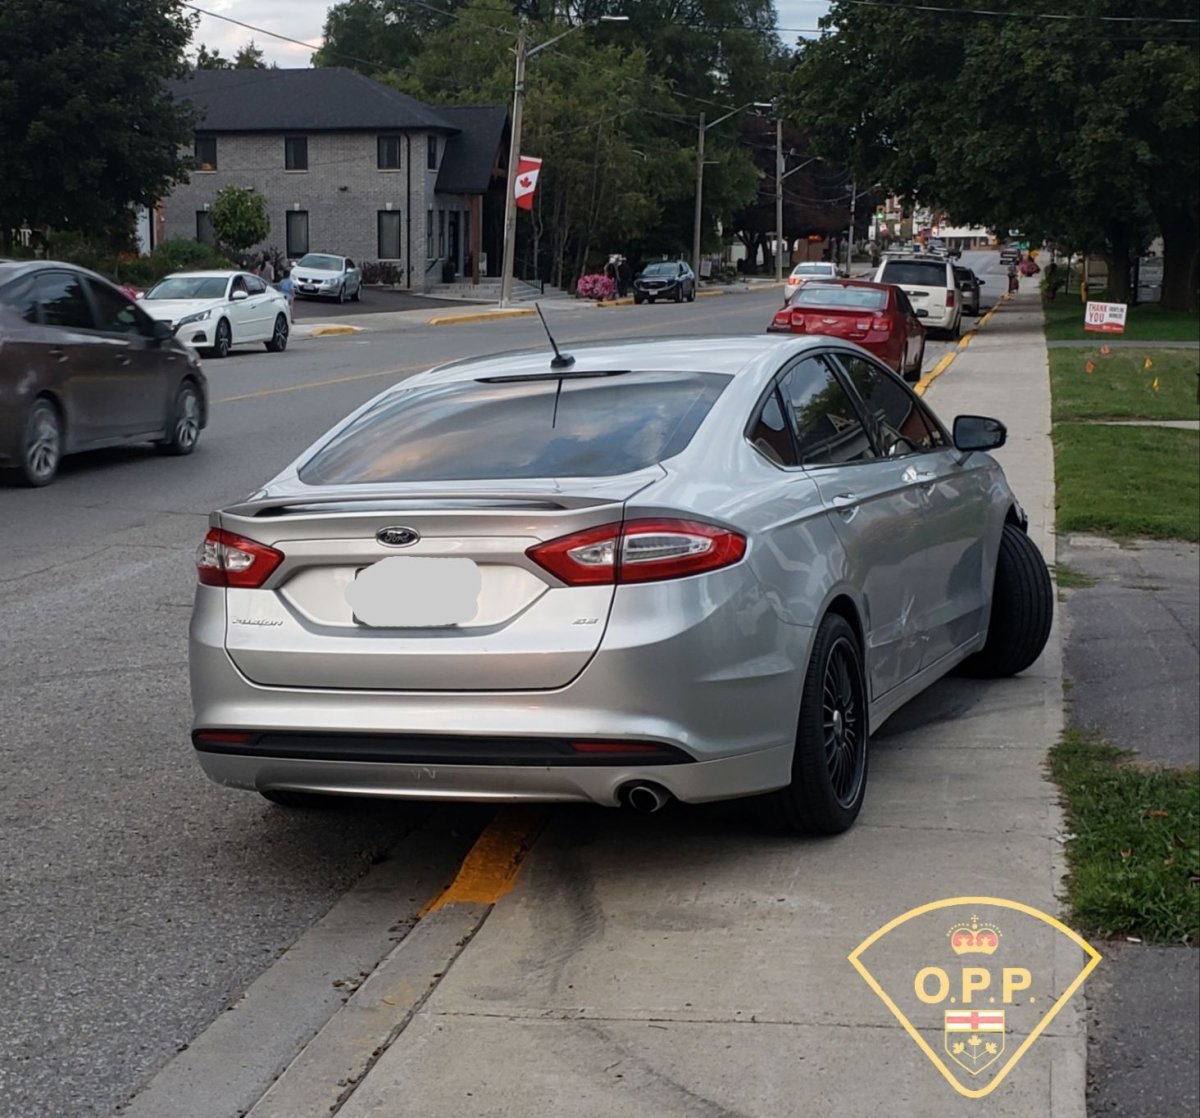 OPP said they recieved reports from multiple motorists claiming the silver-colored vehicle was swerving into oncoming traffic, and driving at inconsistent speeds.  